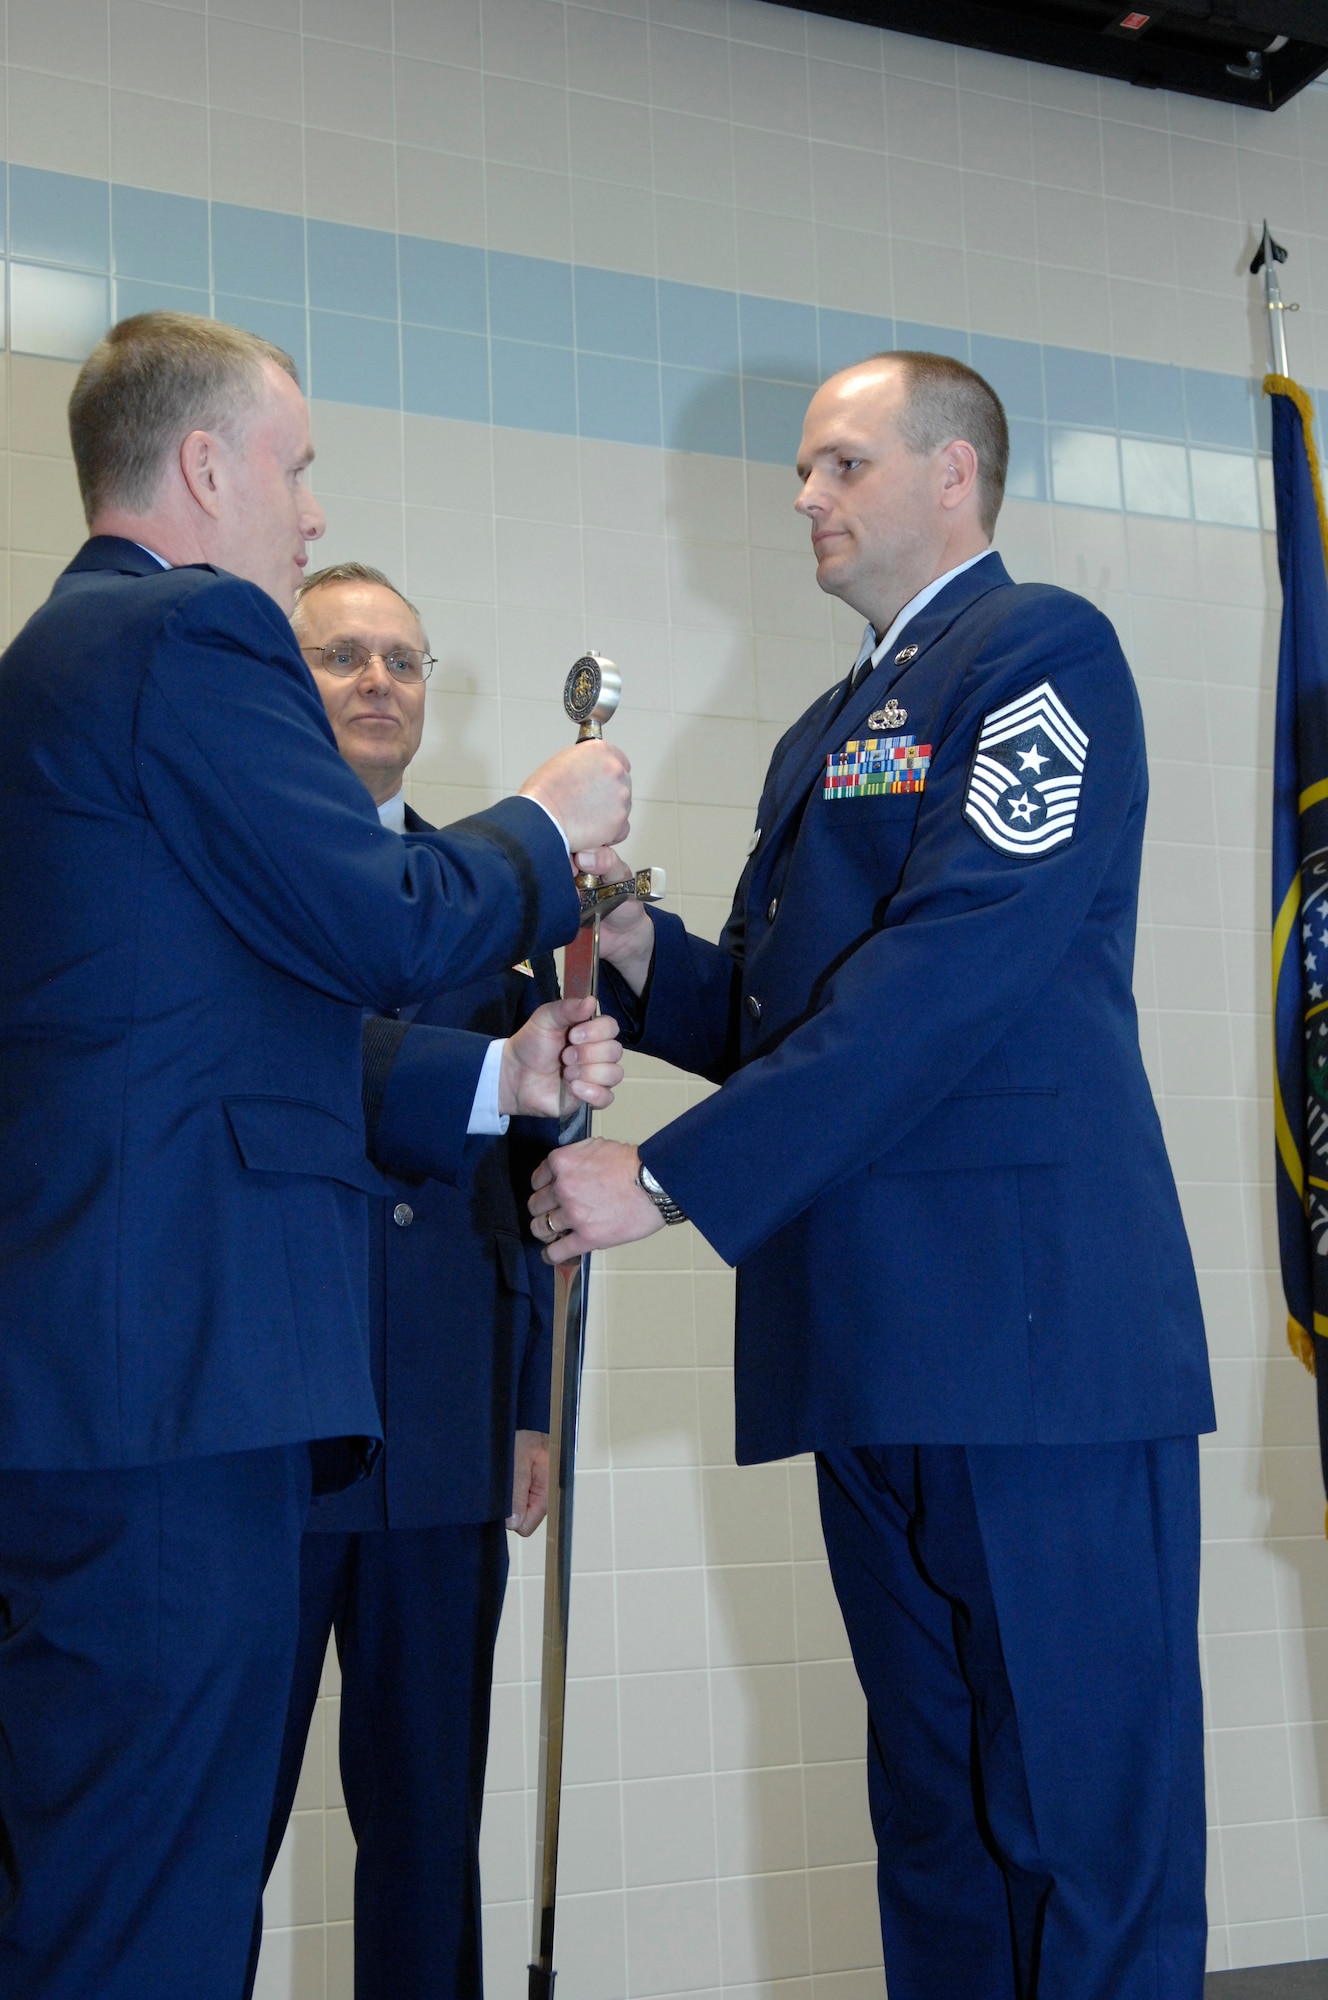 Chief Master Sgt. Michael Edwards accepted the sword from the Director of the Utah National Guard's Joint Staff, Brig. Gen. Kenneth L. Gammon, and assumed position as the new State Command Chief of the Utah Air National Guard during a ceremony at the Utah ANG base, April 6. In the passing-of-the-sword ceremony, the sword represents the duties and responsibilities of the State Command Chief Position. Edwards was formerly the State Human Resources Advisor and assumed position from State Command Chief Master Sergeant Denise Rager, who formally retired immediately after the passing-of-the-sword ceremony. Edwards is now the top enlisted service member in the Utah Air National Guard. (U.S. Air Force photo by Senior Master Sgt. Gary Rihn)(RELEASED) 